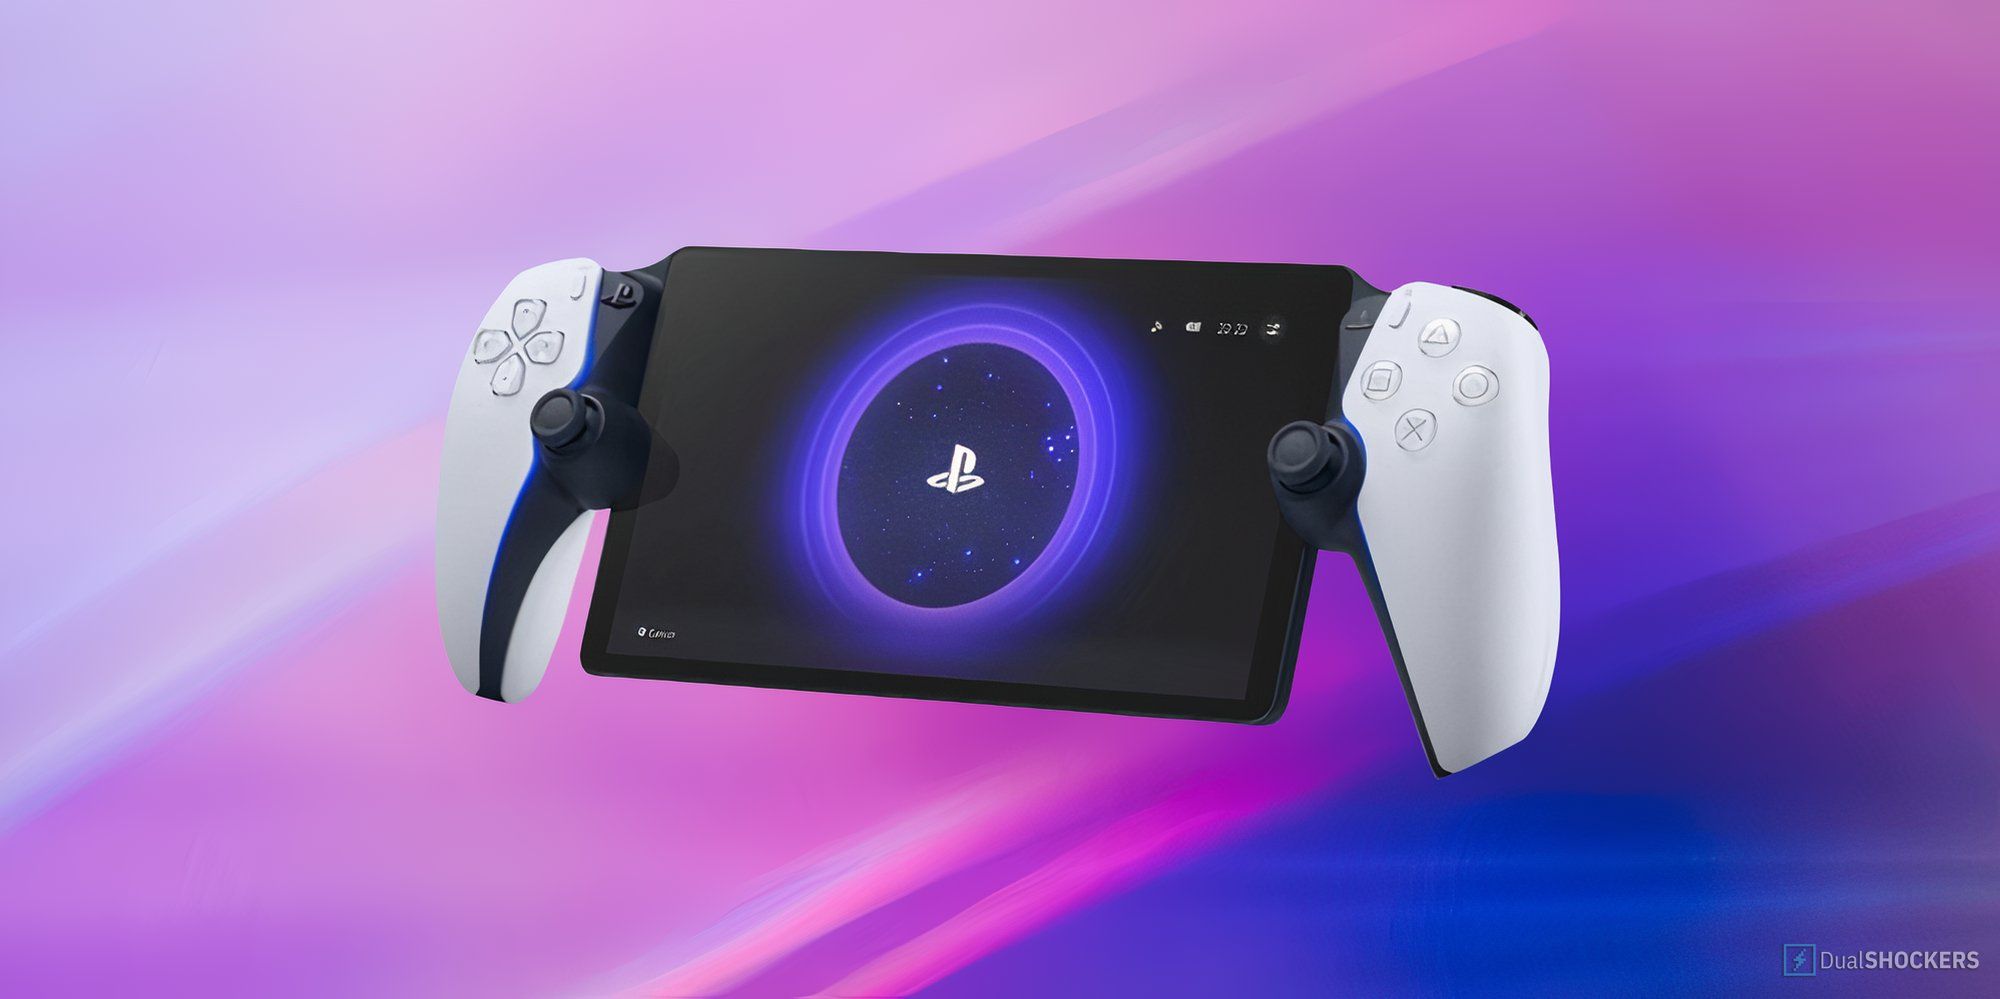 PlayStation Portal Selling “Better Than Expected,” Says Industry Advisor Who “Underestimated Demand”